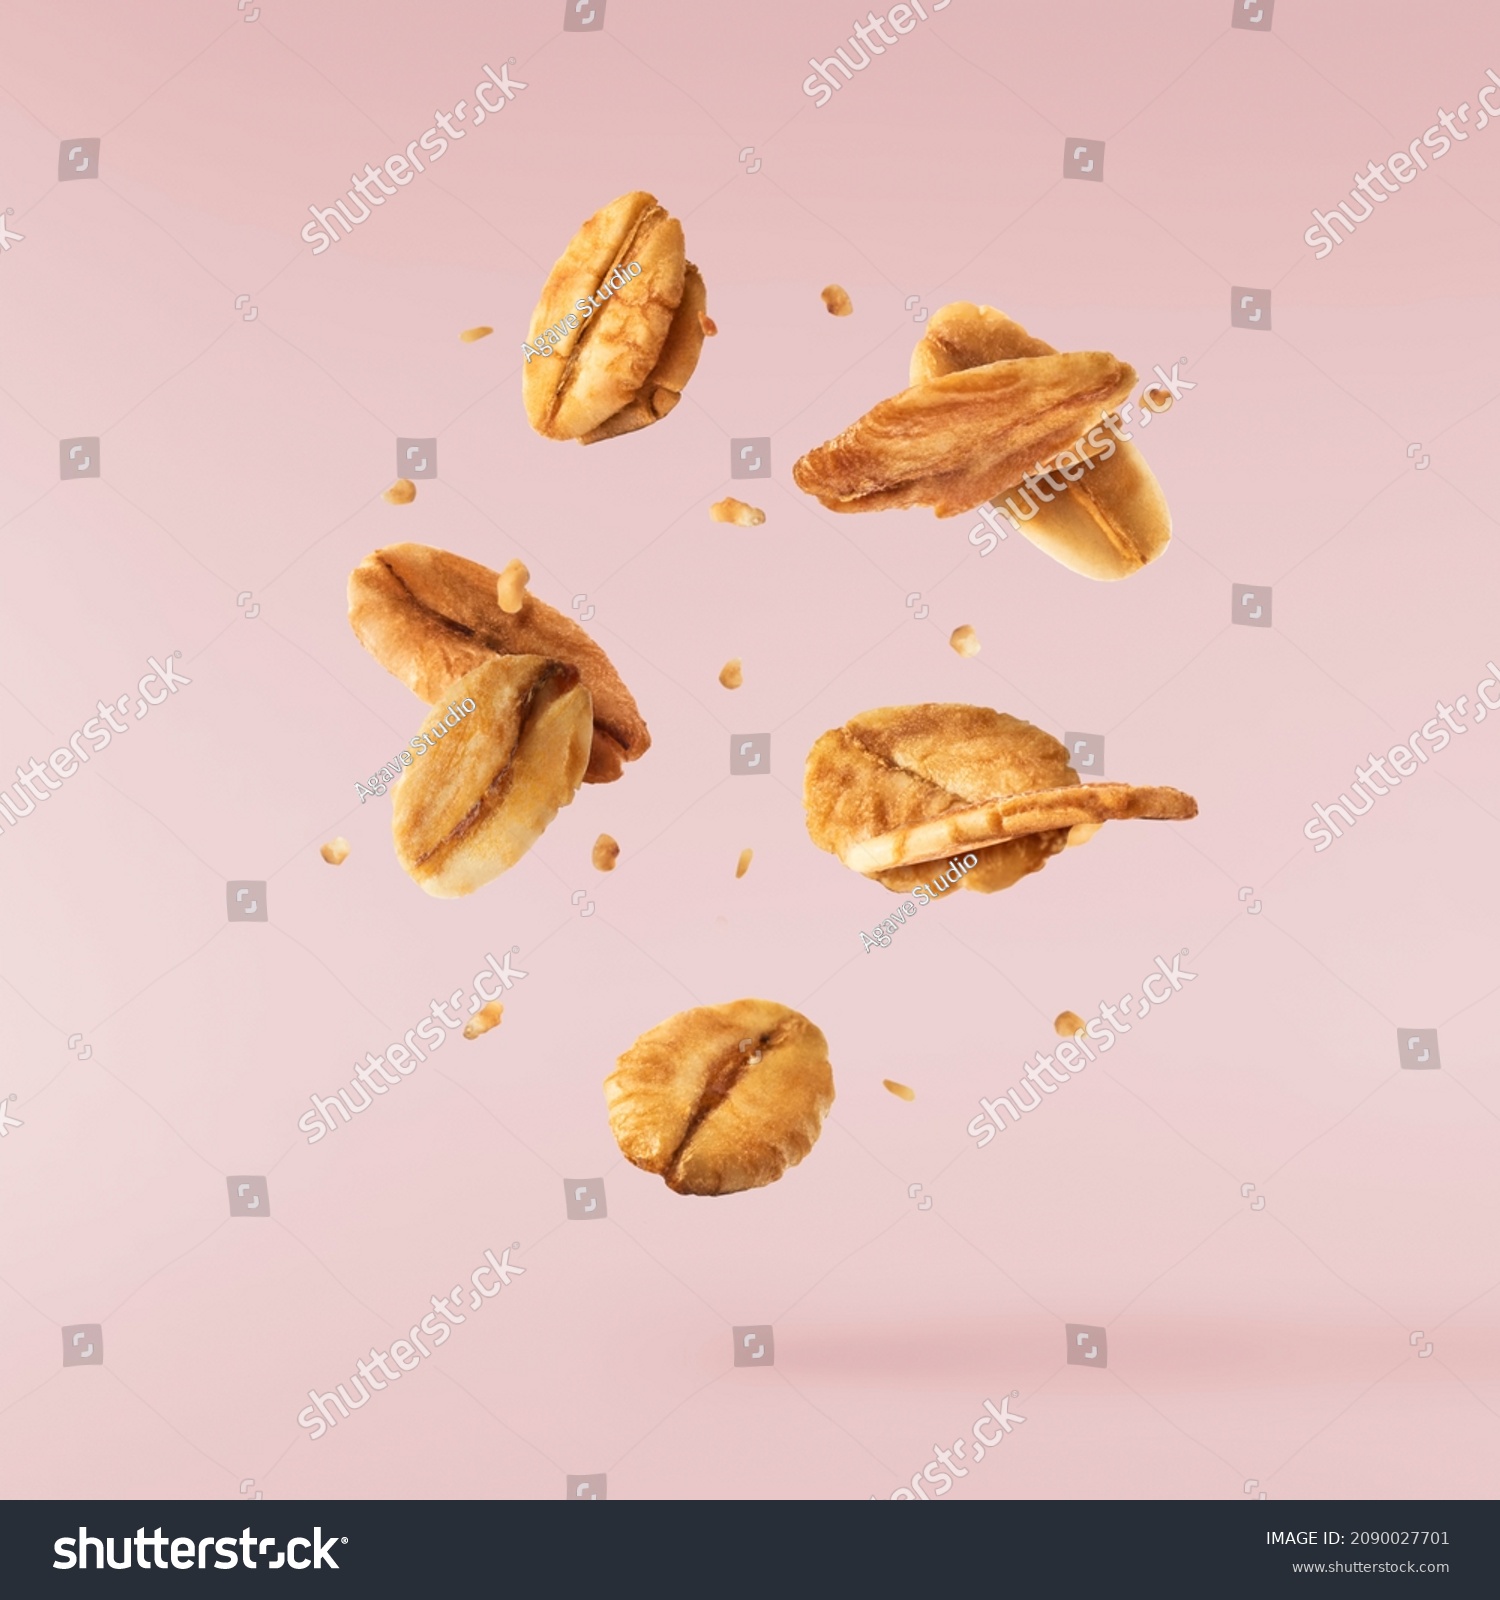 Fresh Granola flakes falling in the air on pink background. Food zero gravity conception. High resolution image #2090027701